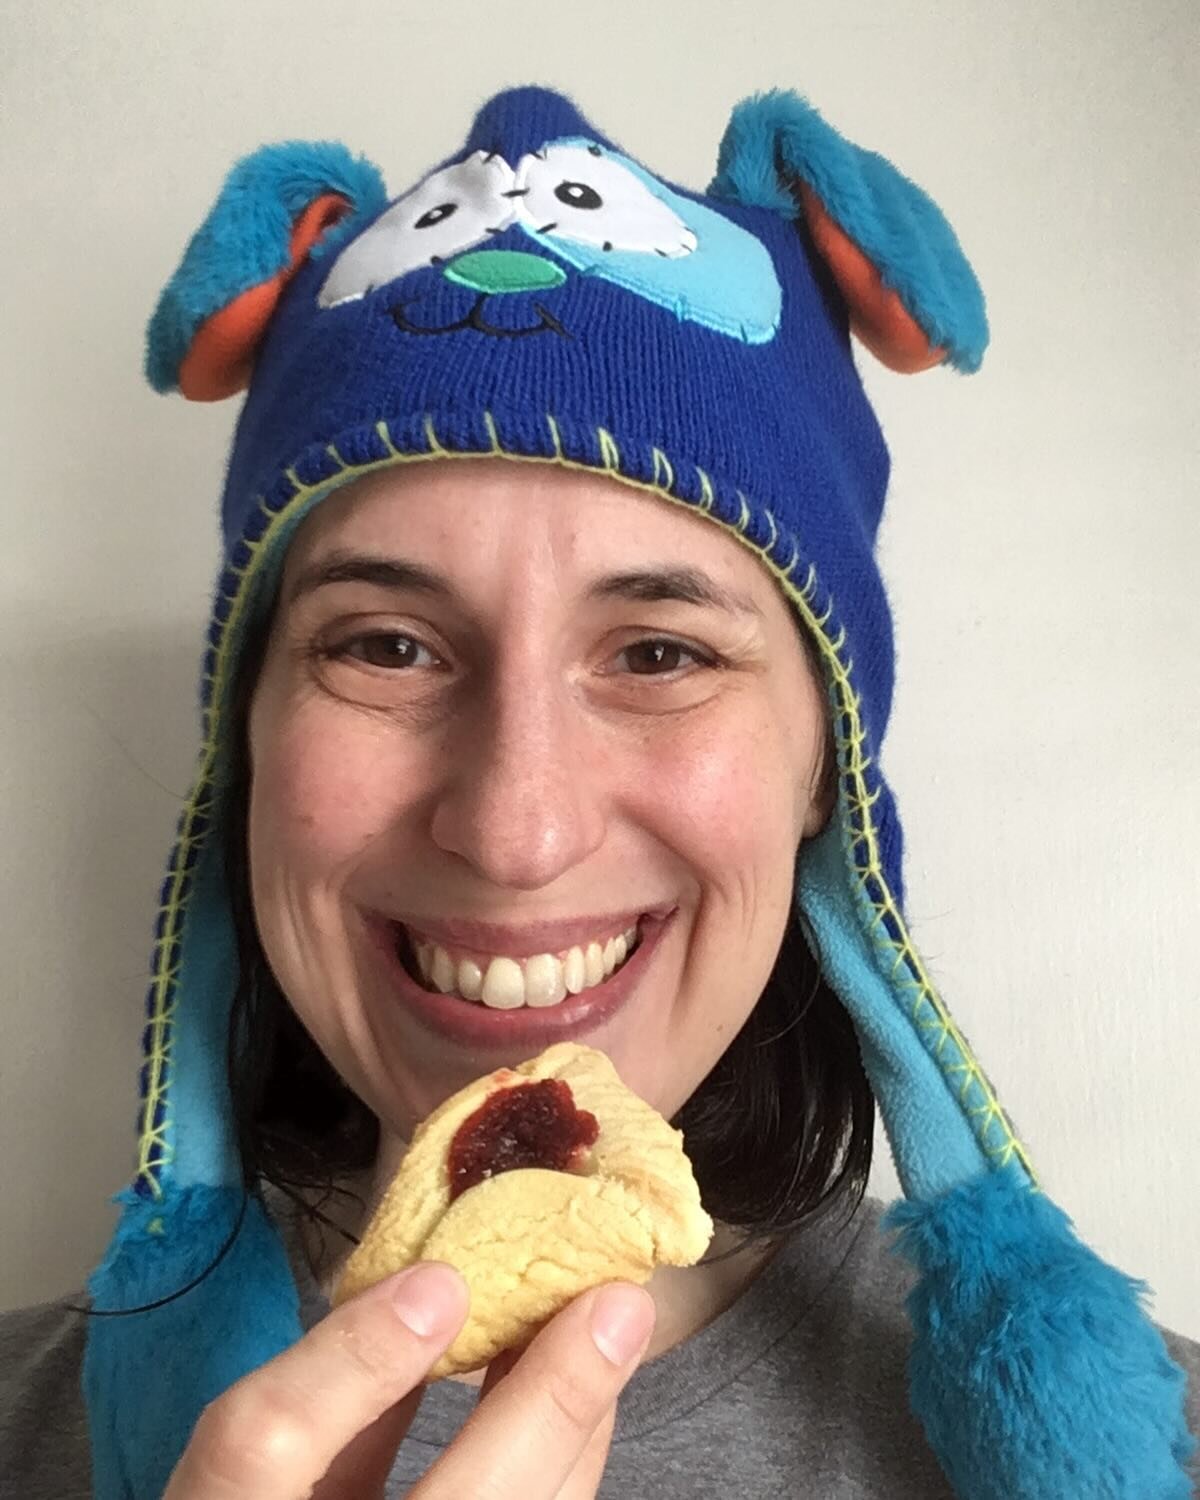 The Jewish holiday of Purim illustrates the importance of advocacy and inclusion. 

The Purim story includes strong, self-advocates, oblivious authorities, power-hungry, advisers, and courageous collaborators.

The lessons of Purim call us to questio